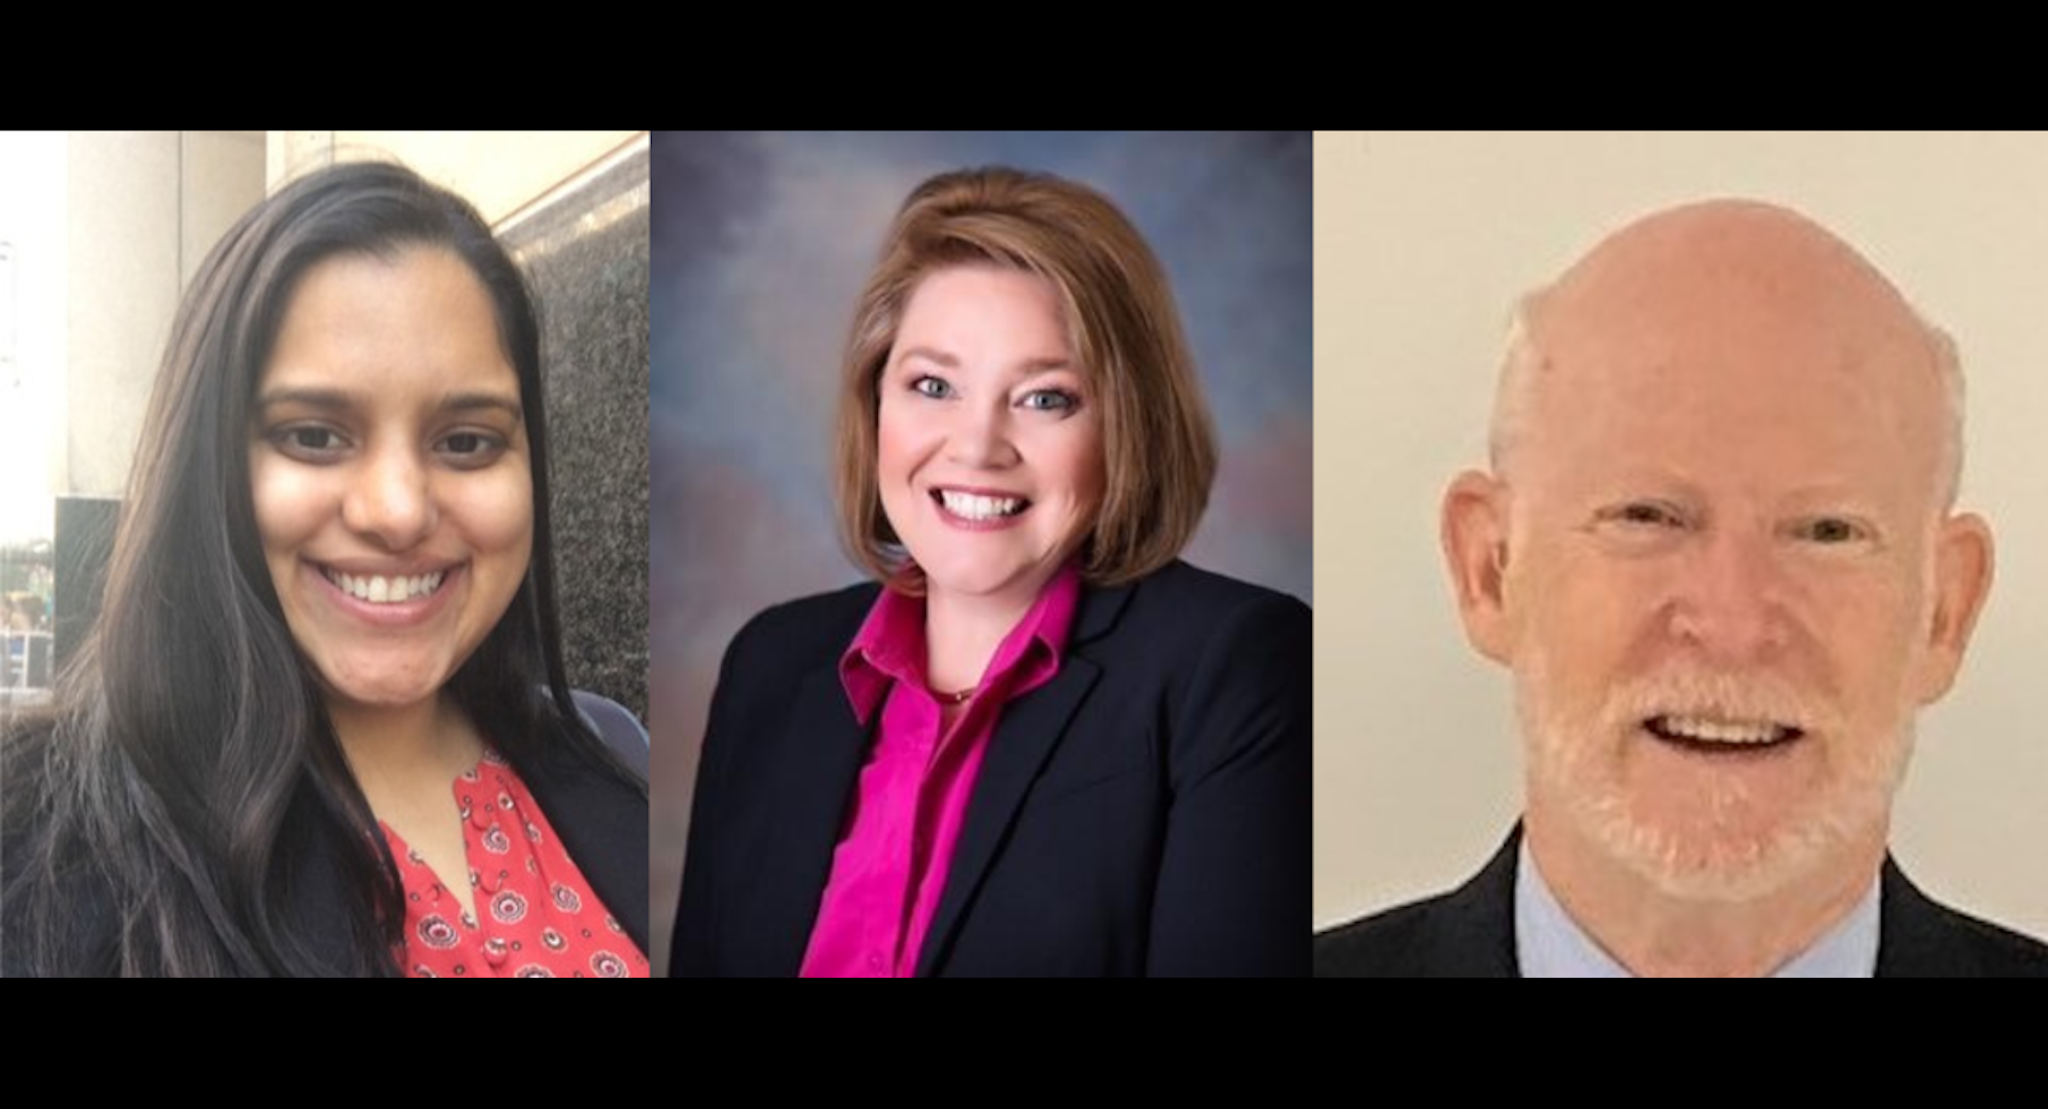 Maryland Assistant Public Defender Aneesa Khan, Appomattox Superintendent Annette A. Bennett, and ACPS Chair Bobby Waddell / Daily Wire composite